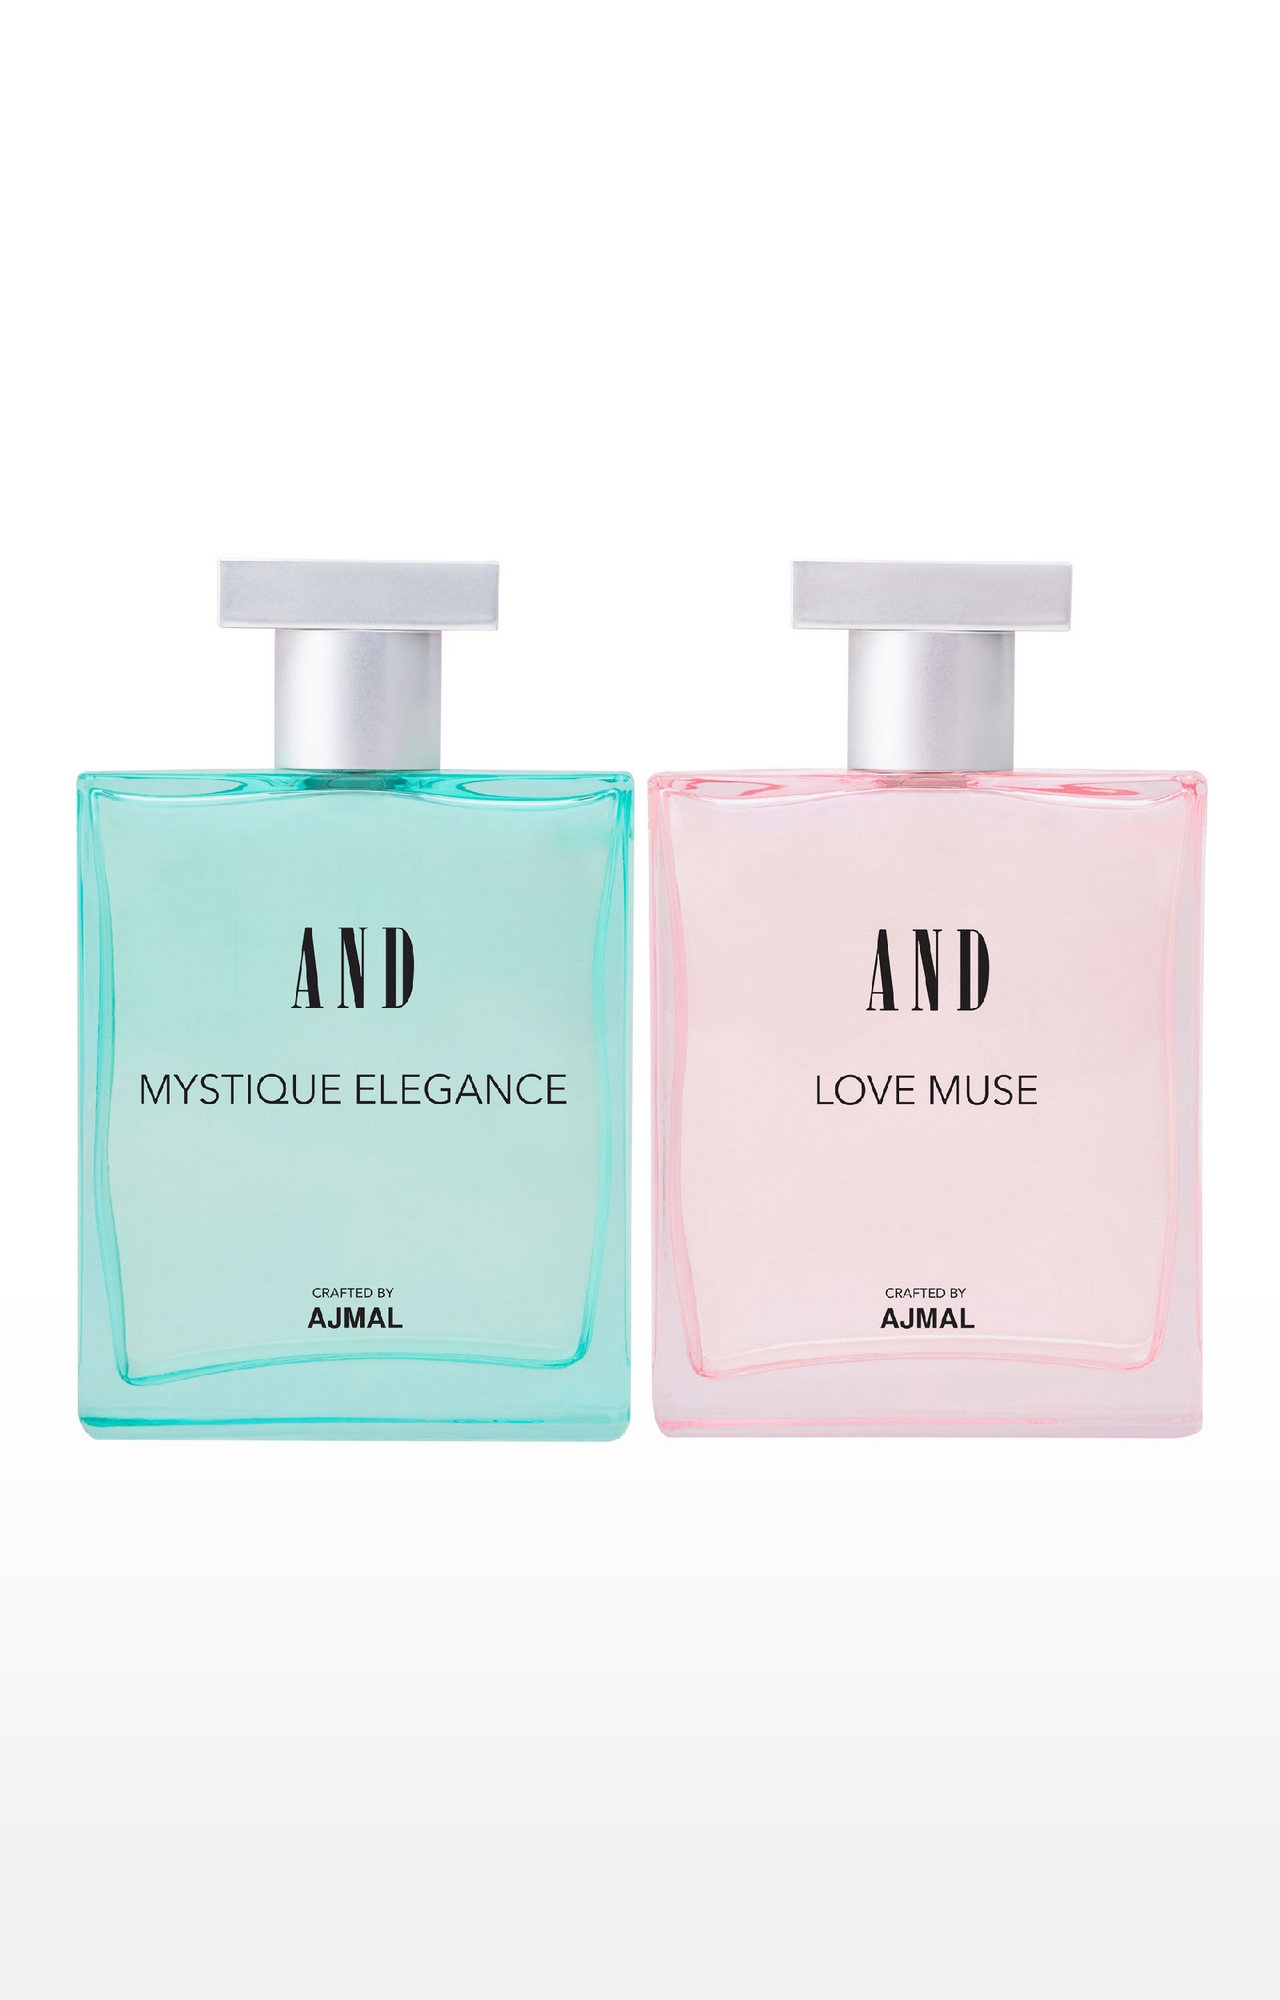 AND Mystique Elegance & Love Muse Pack of 2 Eau De Parfum 50ML each for Women Crafted by Ajmal 